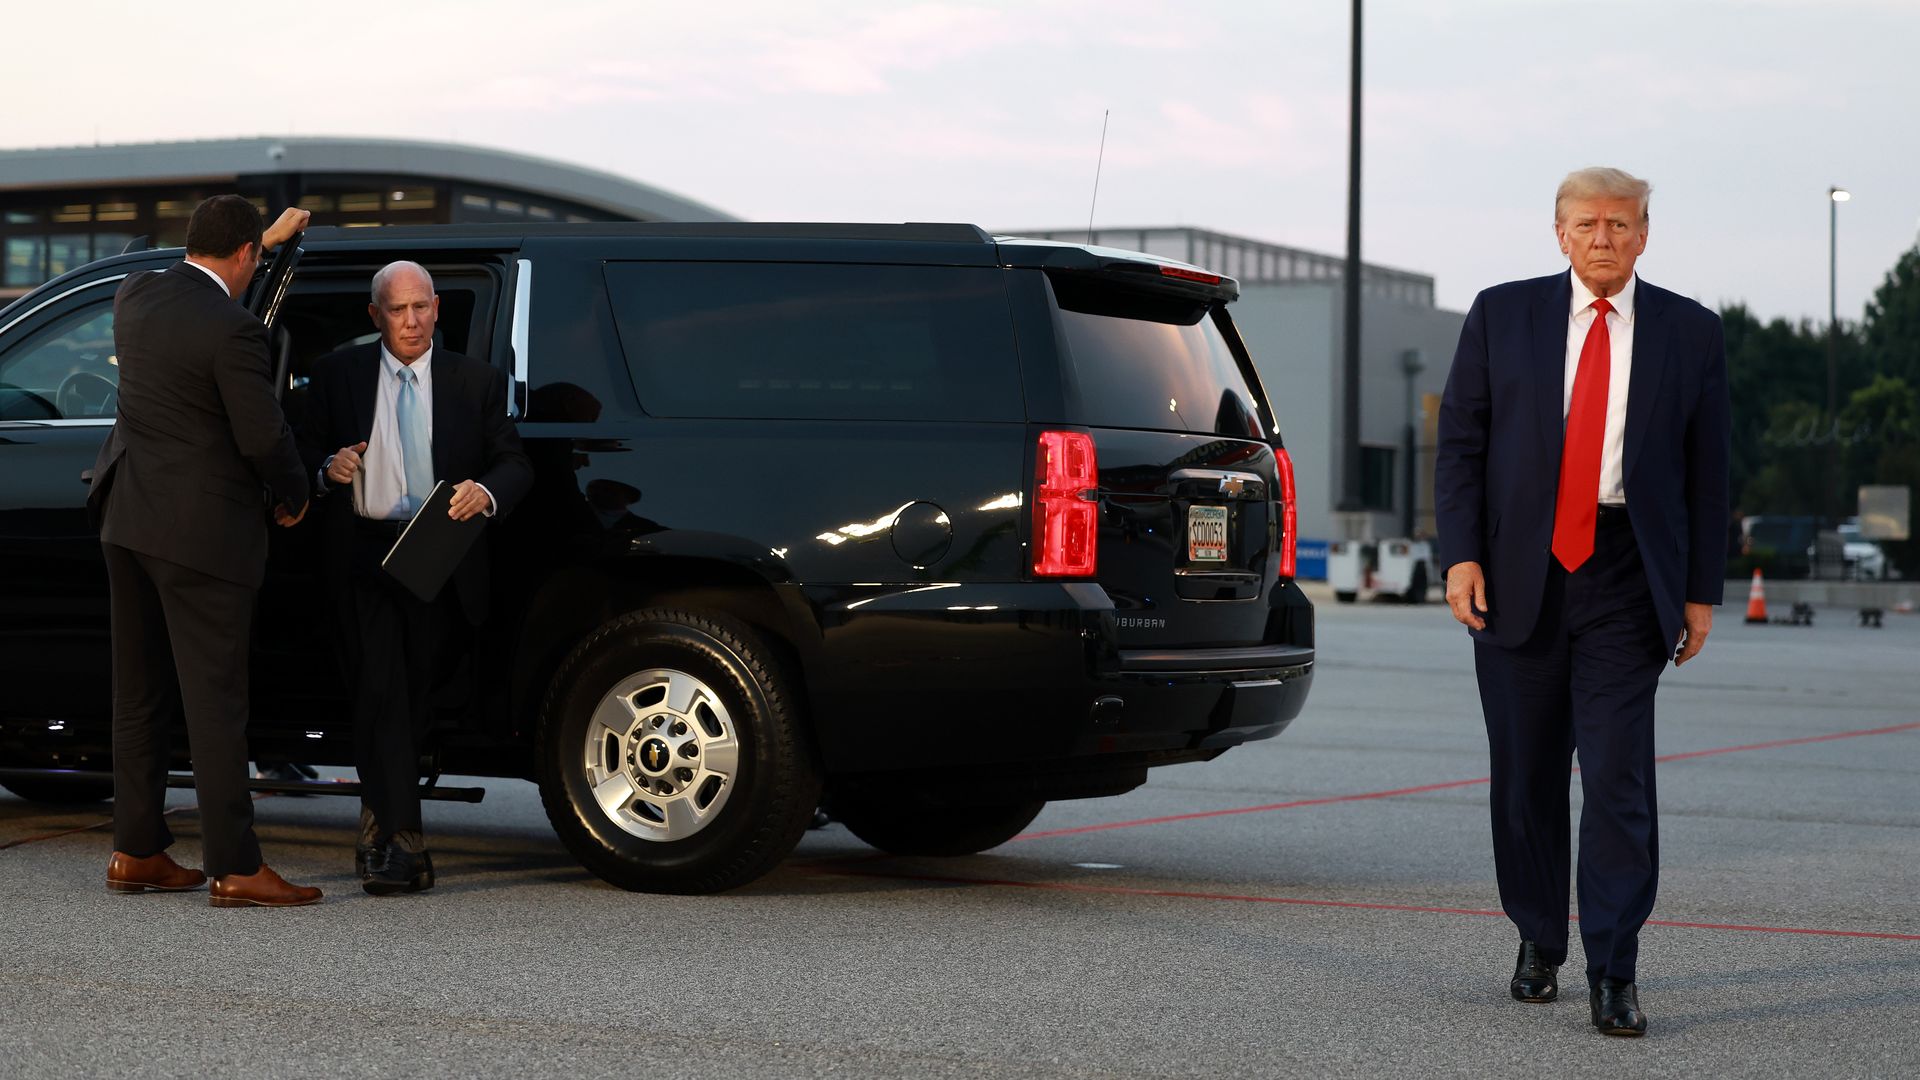 Trump on the right side of the photo in a suit and red tie walking away from a black car. To the left, his attorney in a suit and blue tie gets out of the car. 